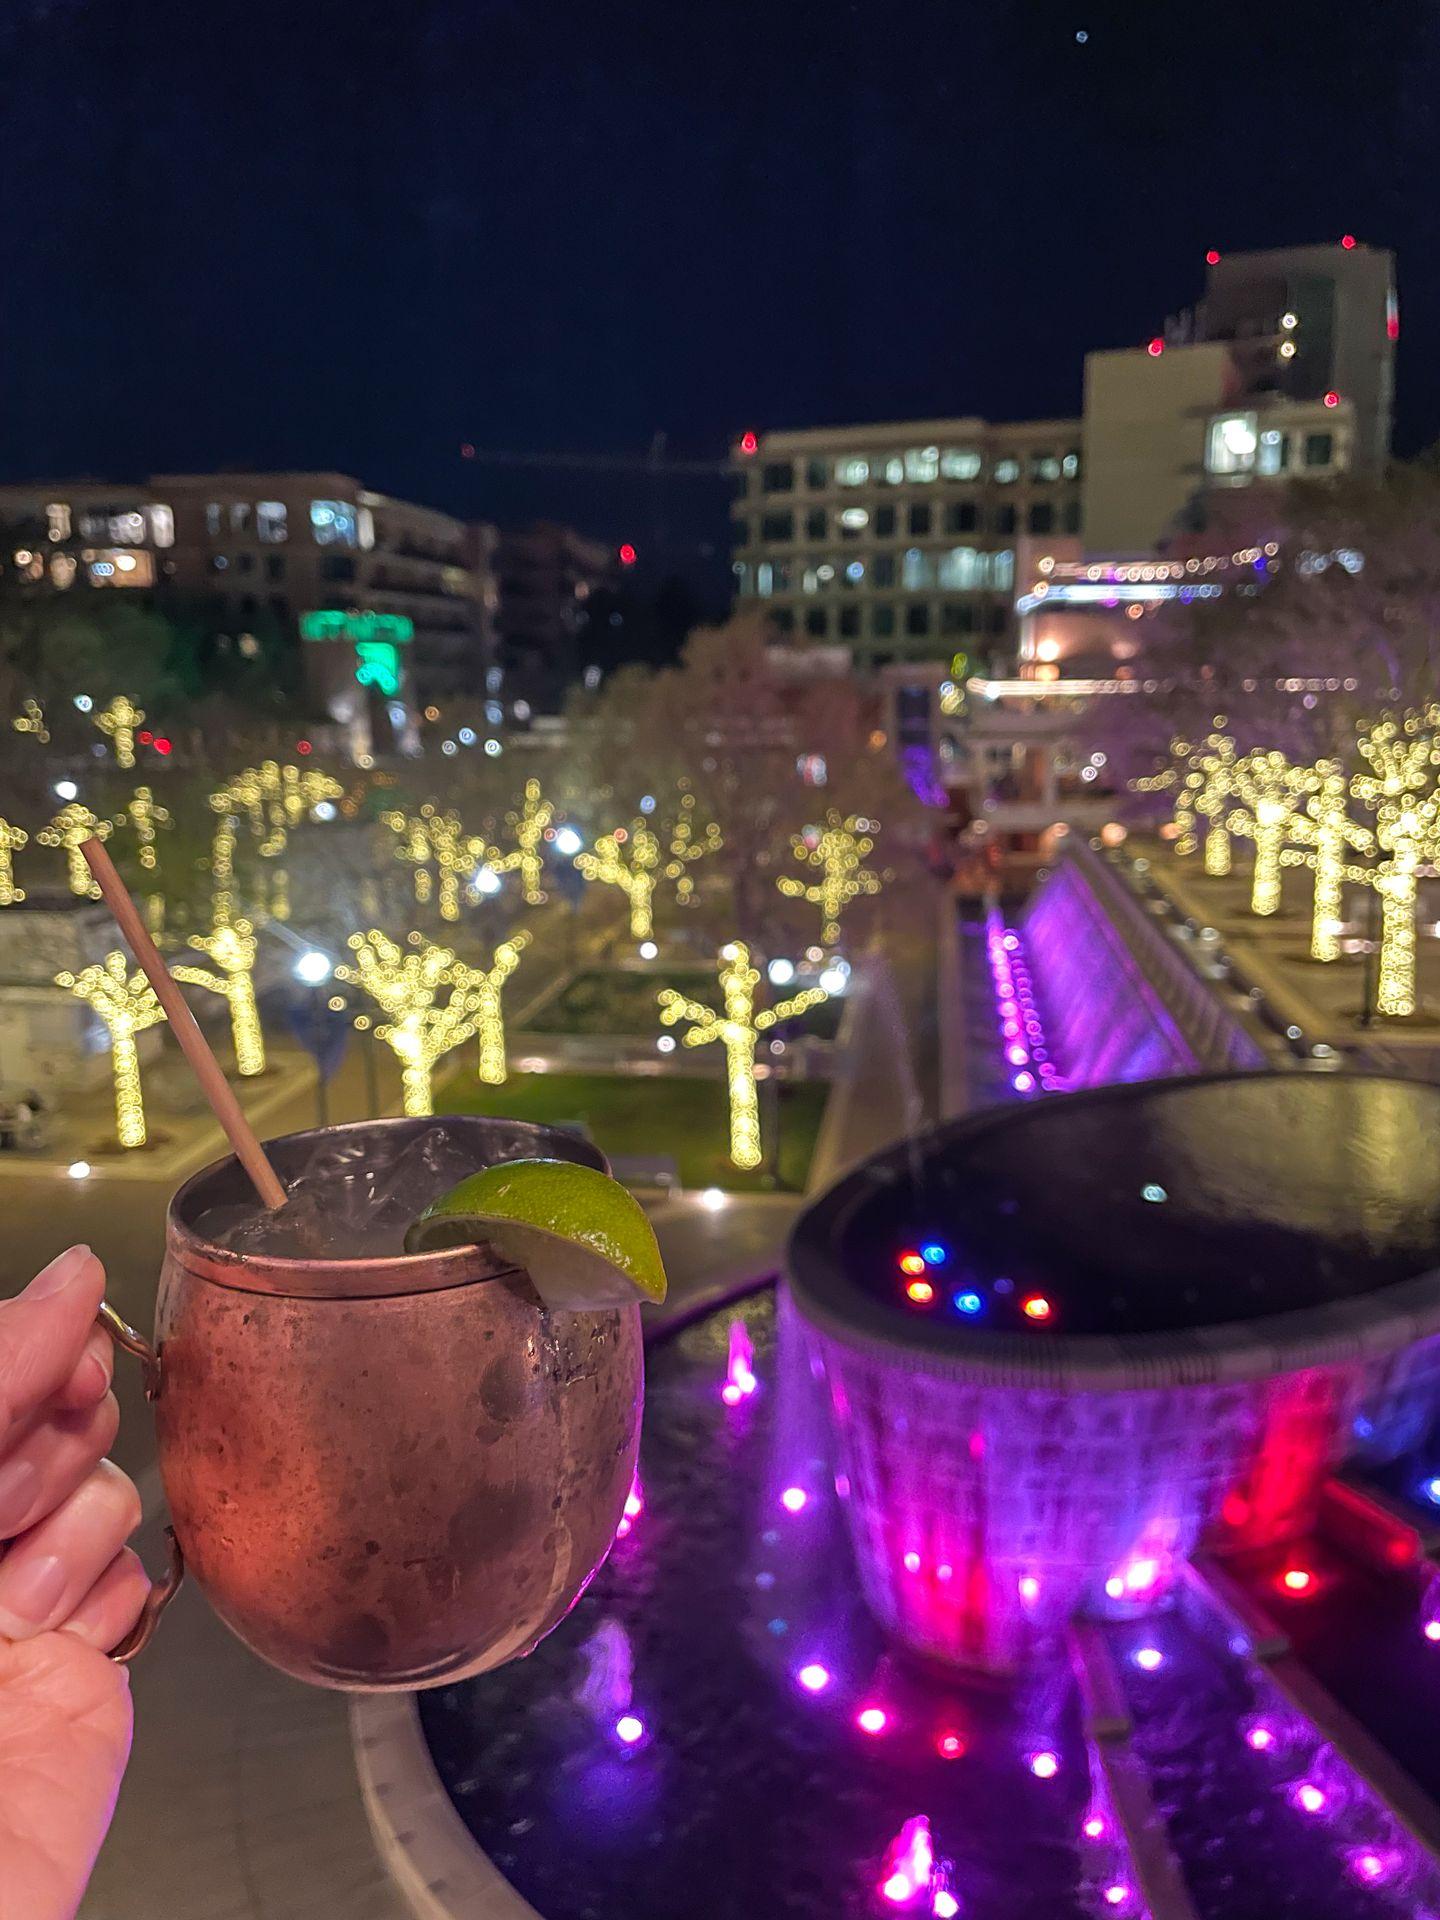 Holding up a moscow mule on the outdoor patio of Como Social Club